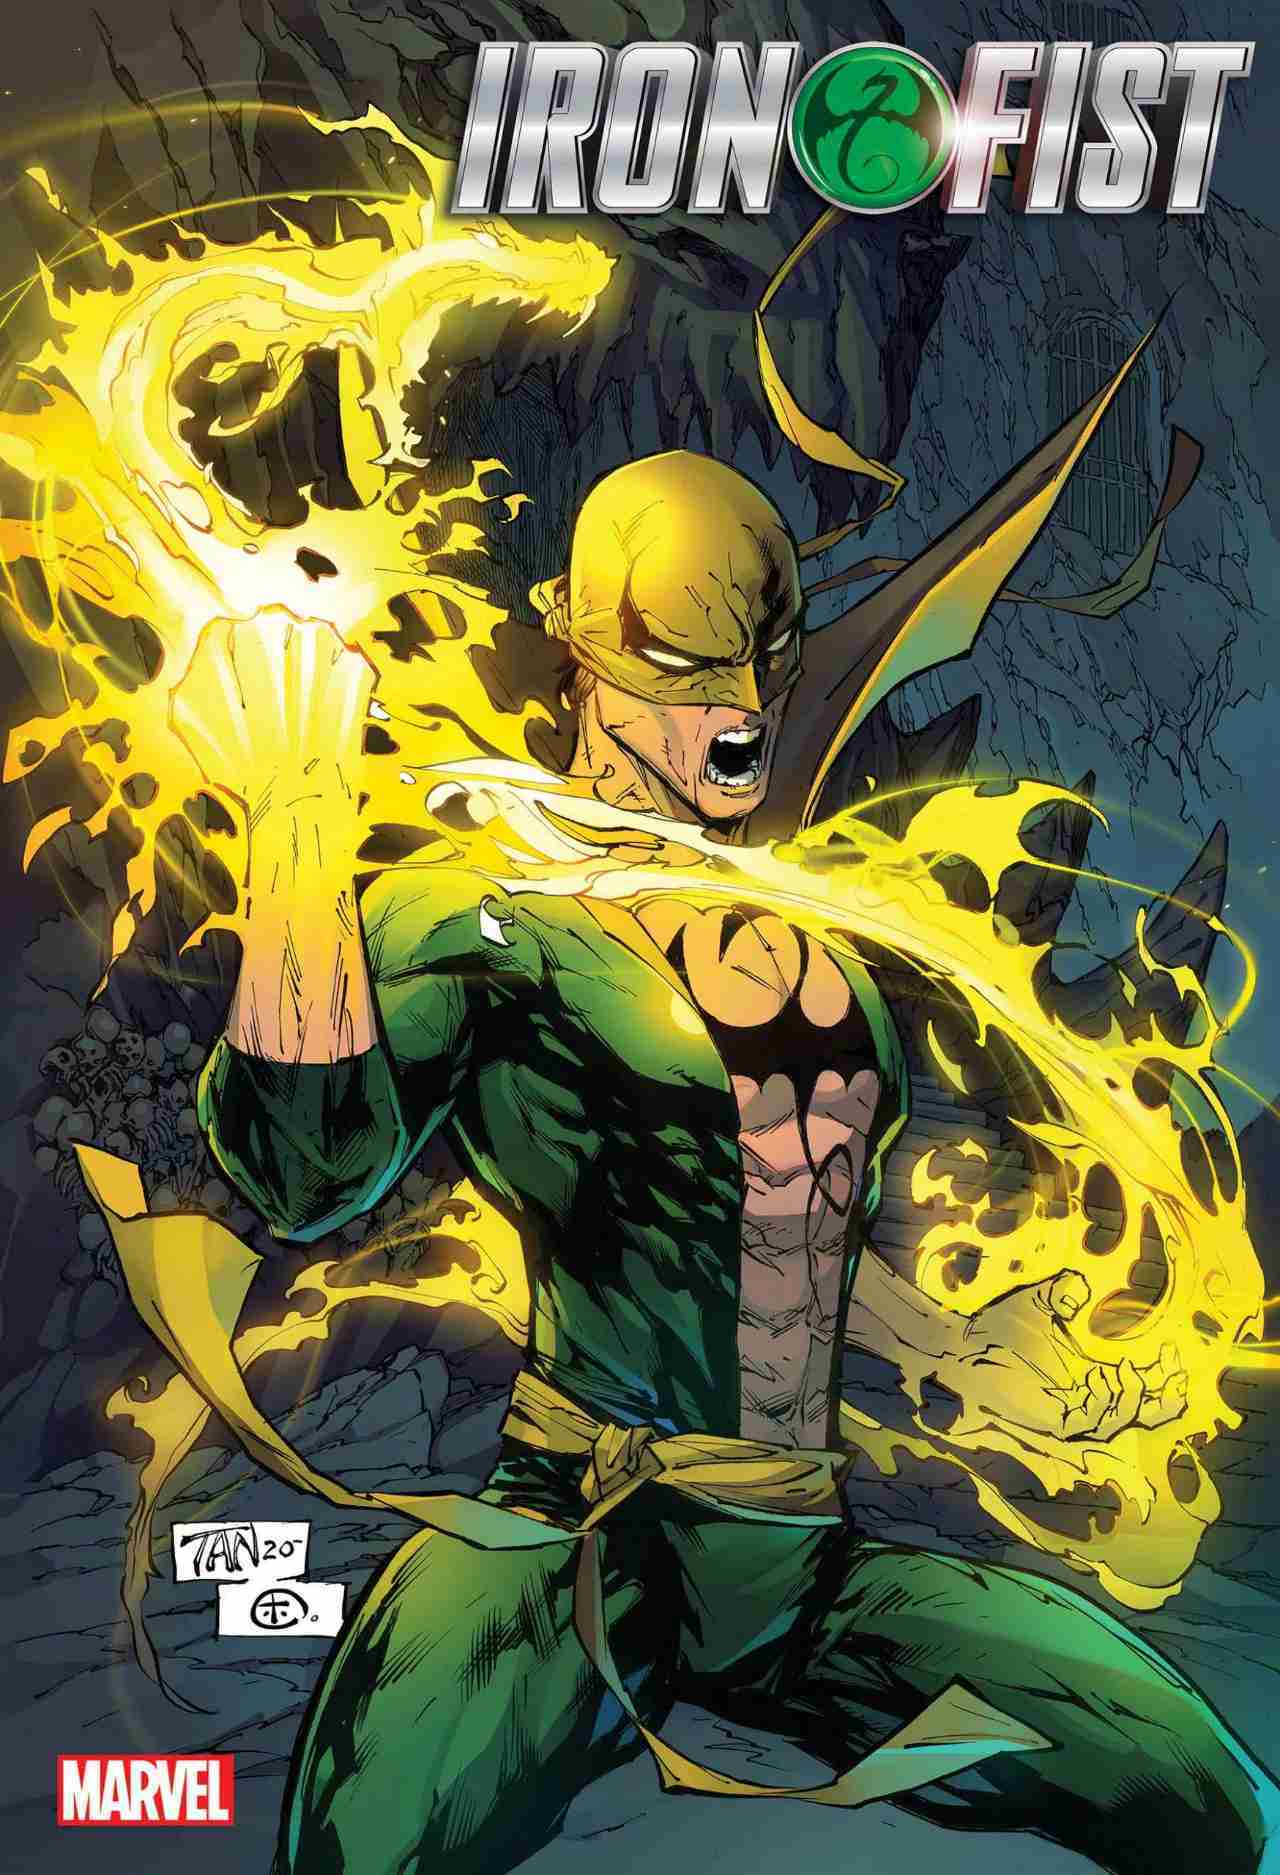 Iron Fist Heart of the Dragon # 1